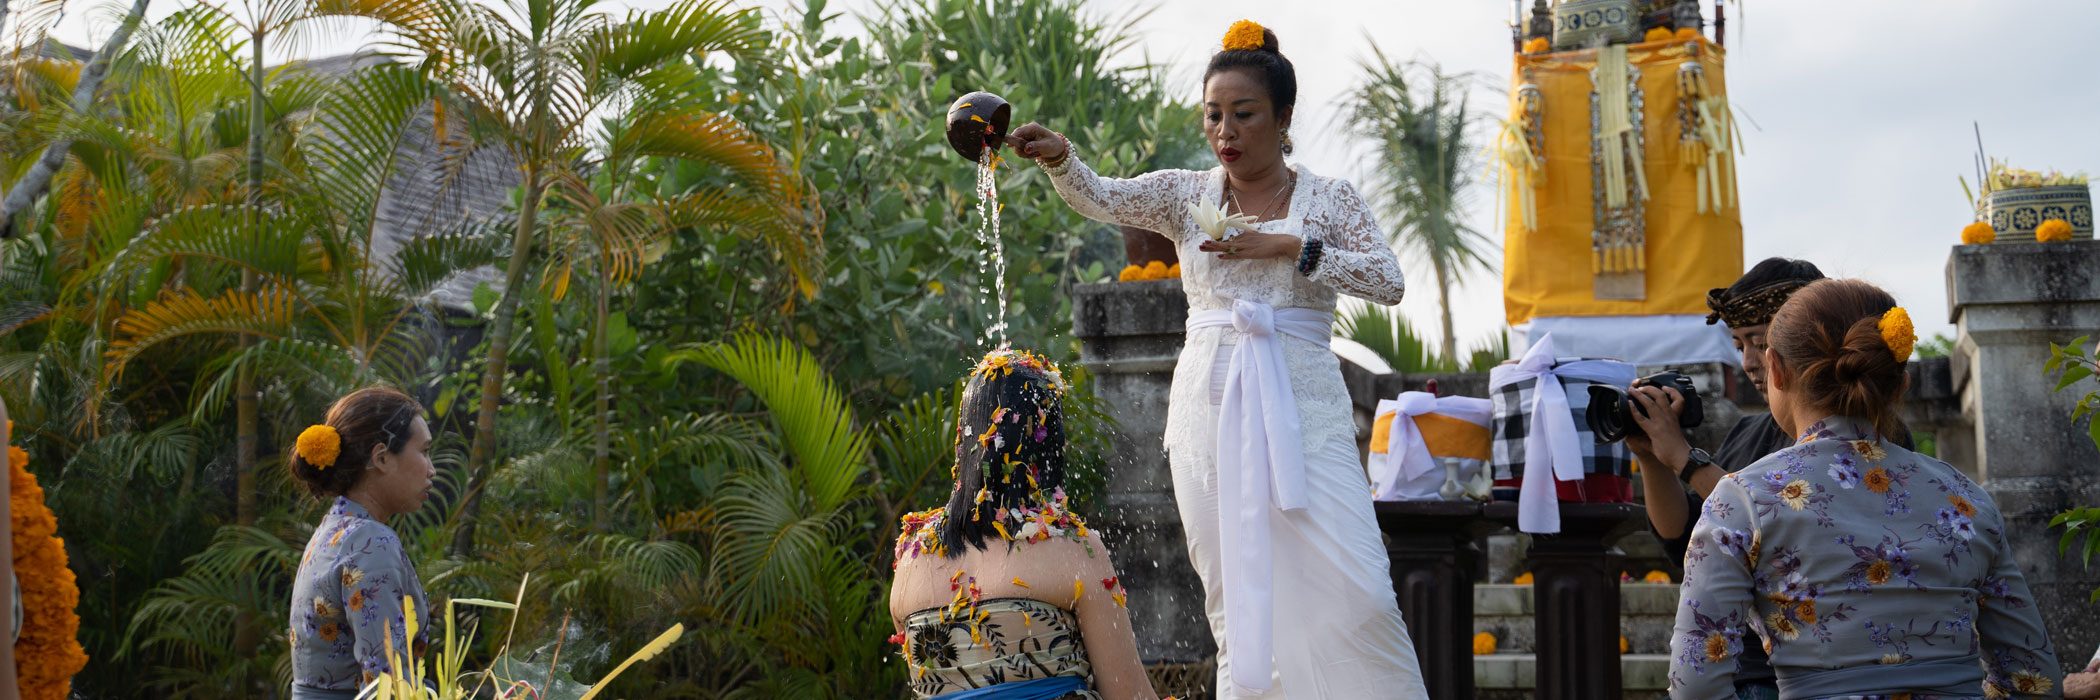 Raffles Bali - Self-Purification with Sunset Blessing Ceremony